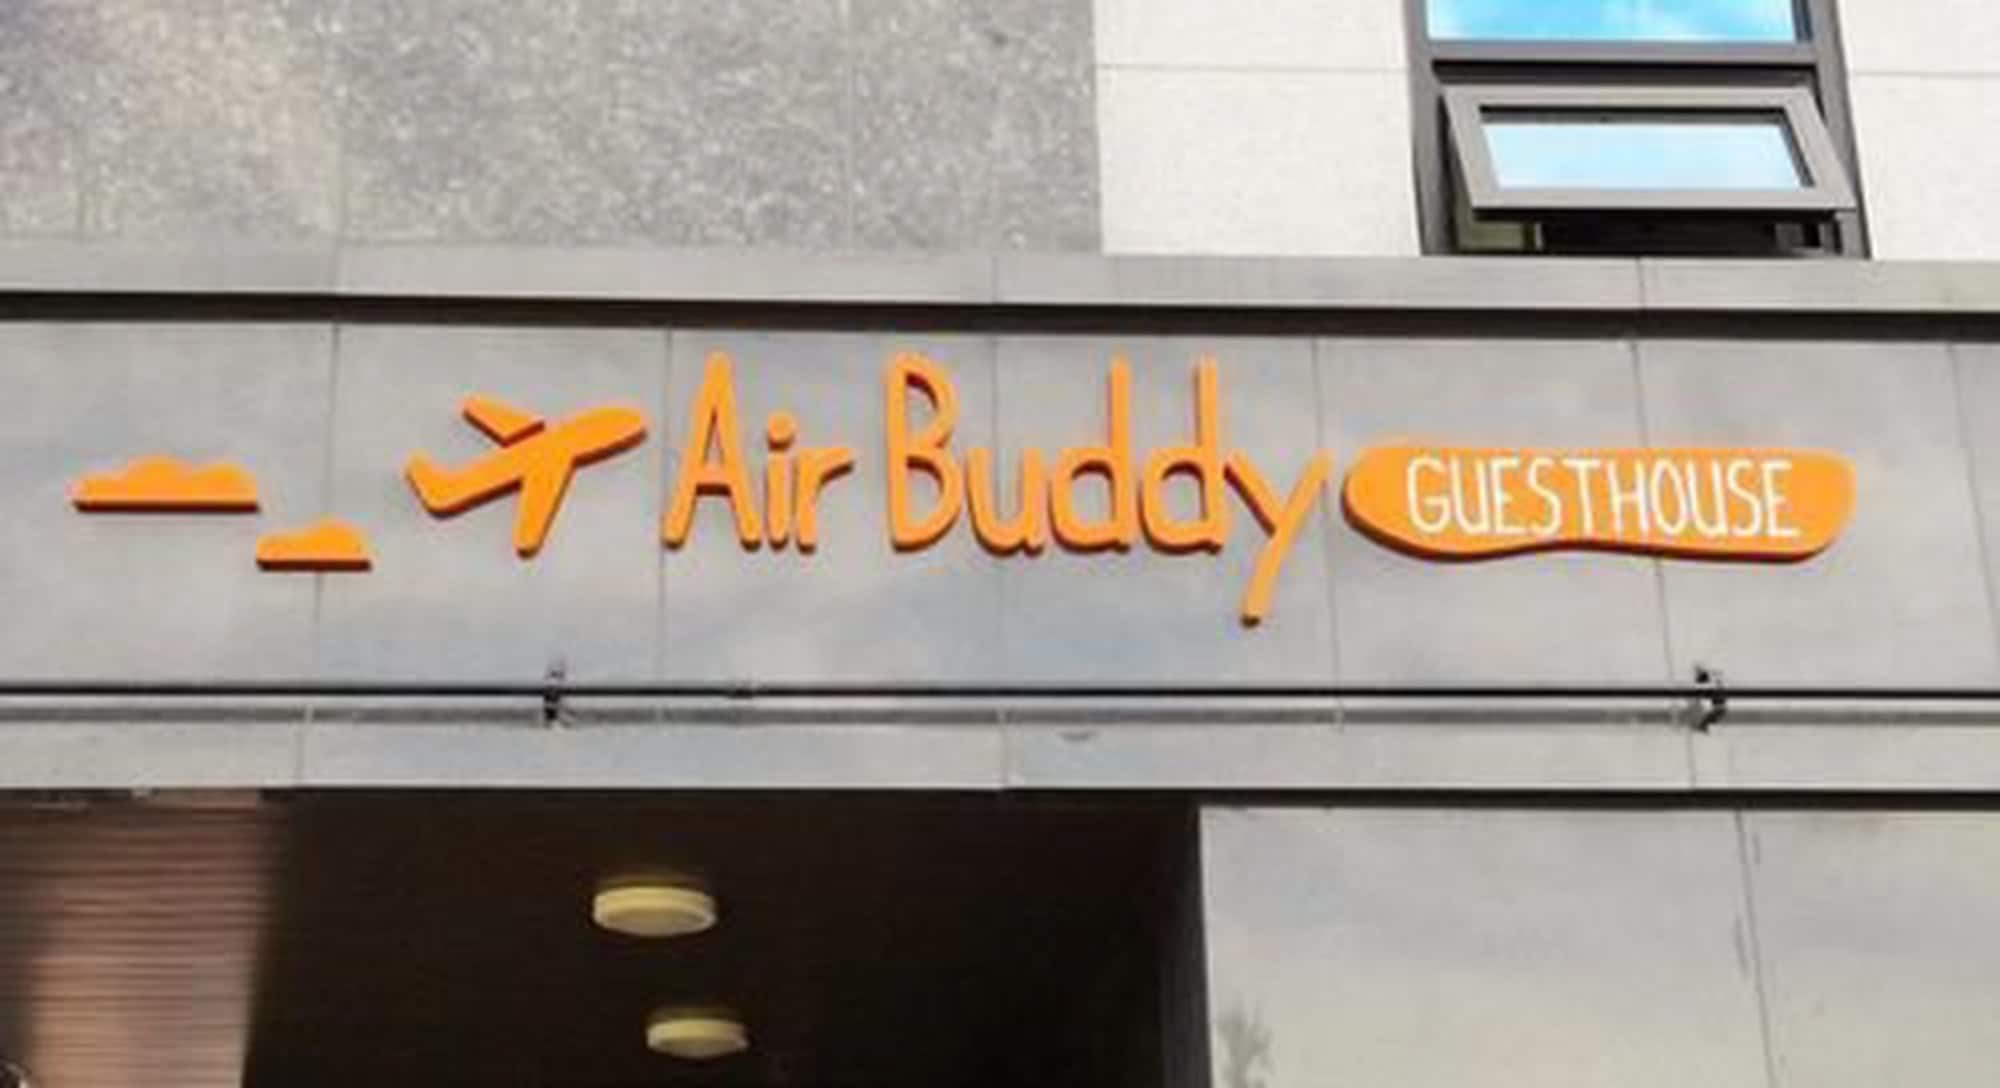 Airbuddy Guesthouse Incheon Airport Buitenkant foto